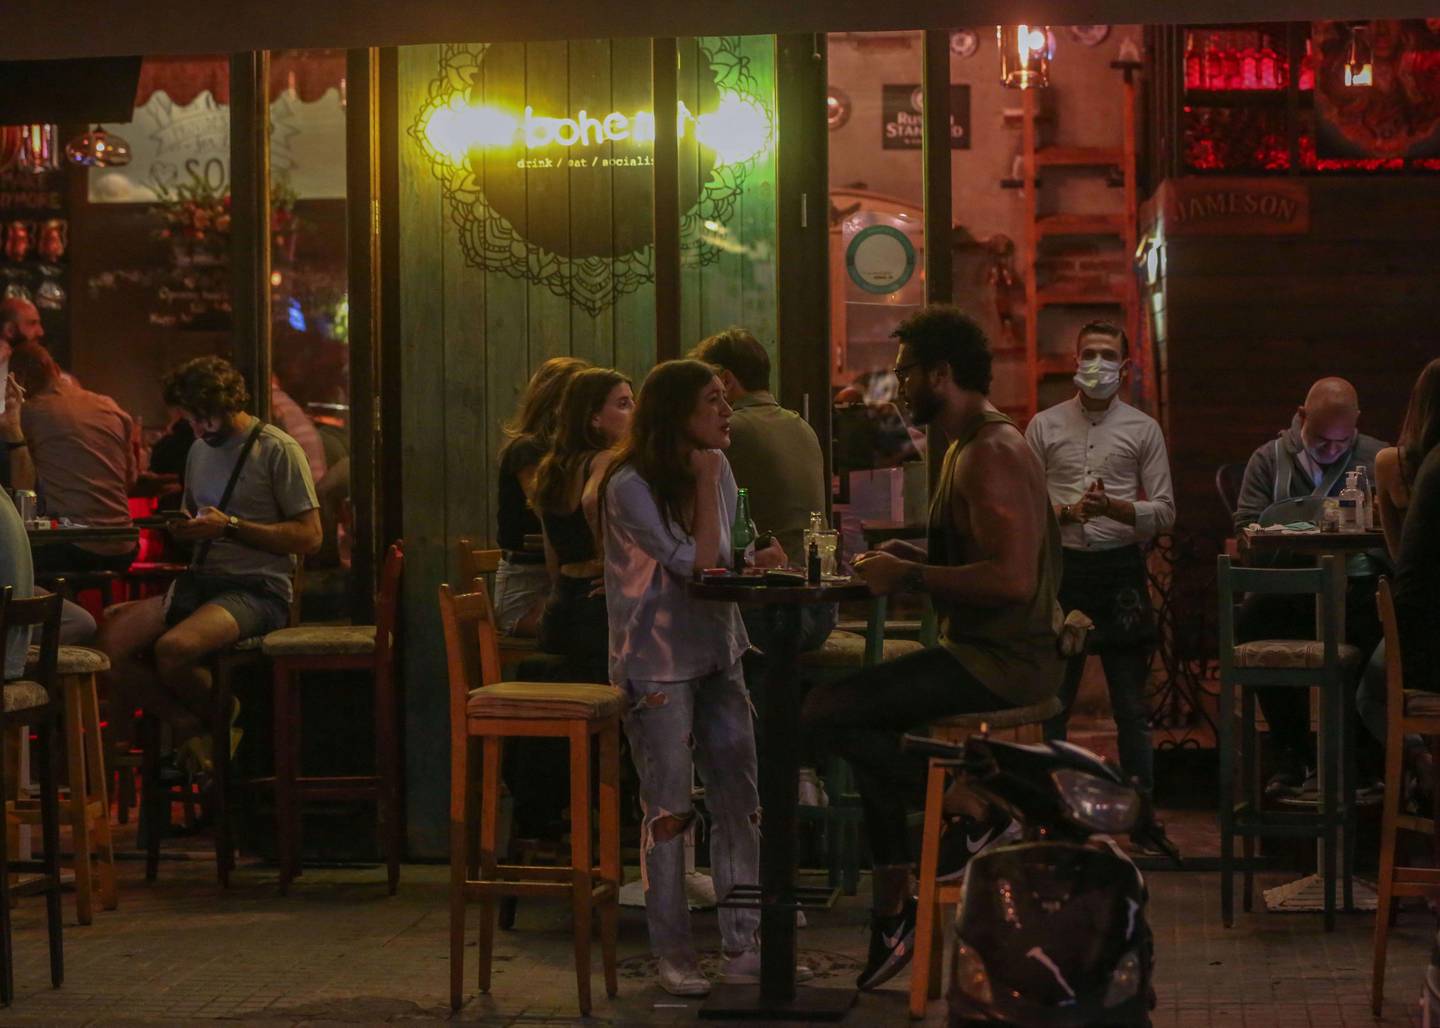 People gather at the terrasse of a bar in the trendy neighborhood of Gemmayzeh in the Lebanese capital Beirut on June 1, 2020, as the country is set to gradually open up, after weeks of lockdown to stem the spread of the novel coronavirus. - The worst of the coronavirus pandemic has passed but declaring victory against the disease would be premature, Lebanon's health minister said, a day after the government announced easing restrictions in the upcoming week, including a curfew which is pushed back from 7:00 pm to midnight. (Photo by PATRICK BAZ / AFP)